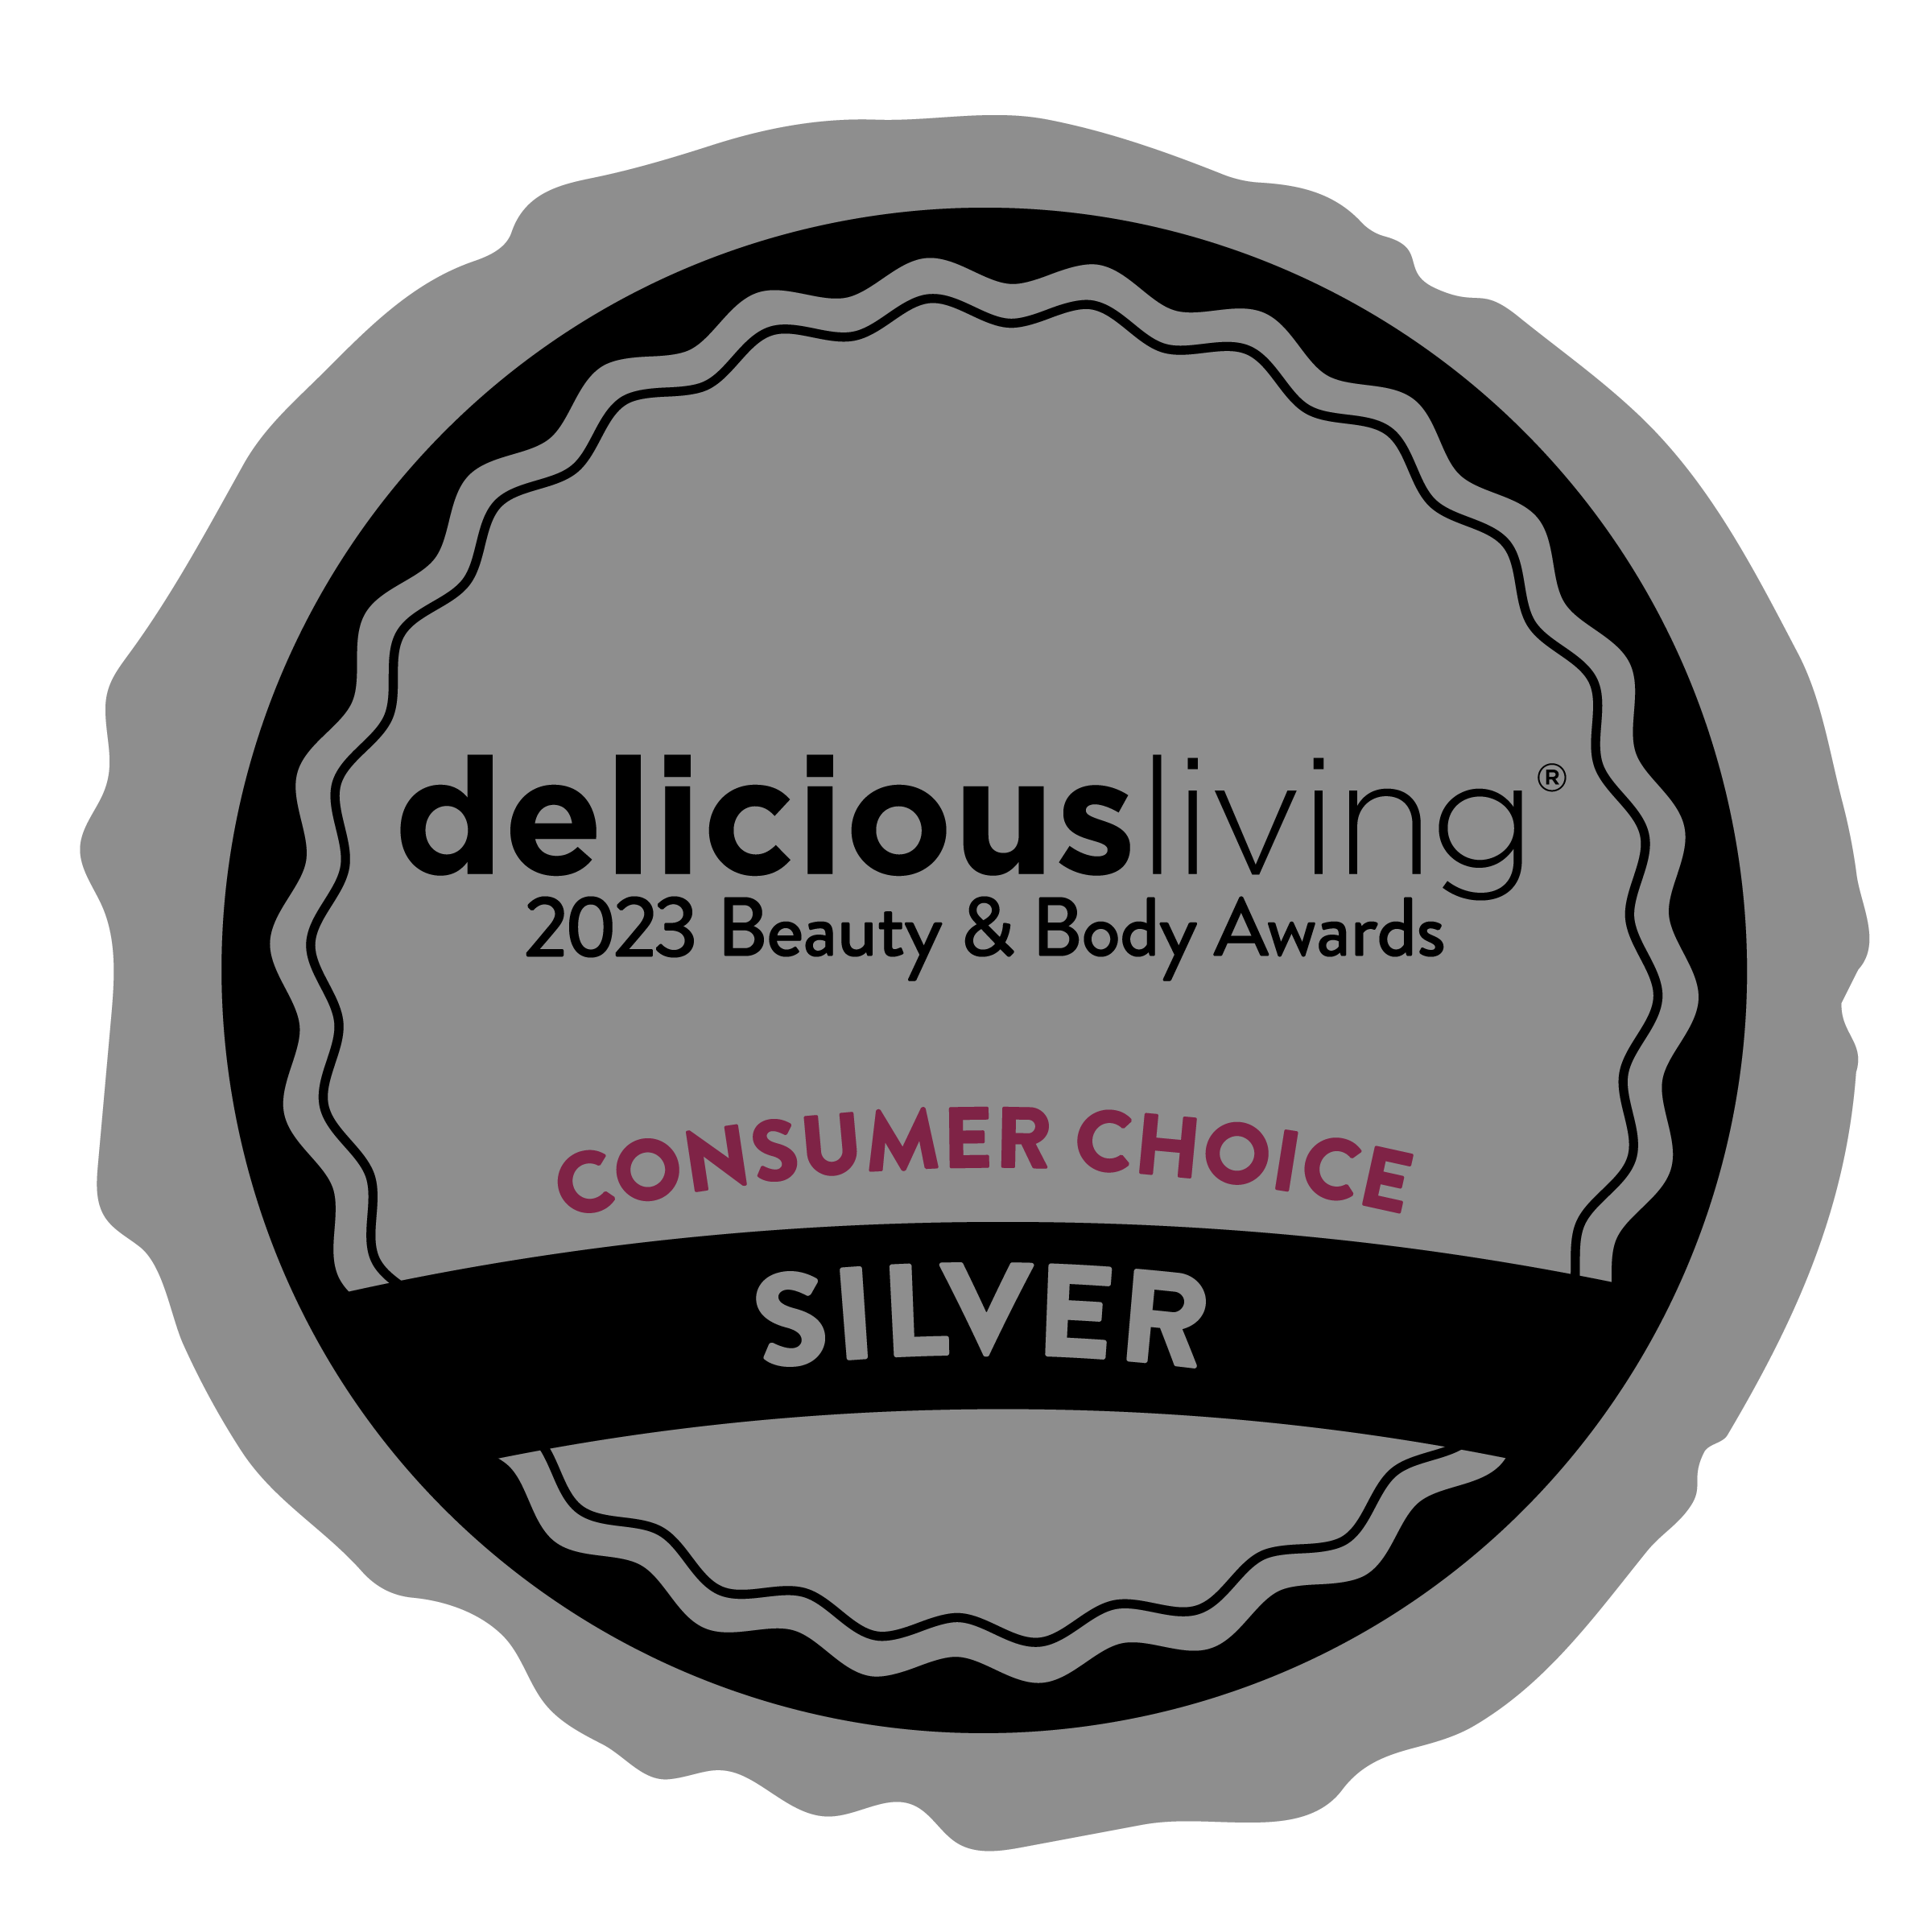 A silver badge showcasing the delicious living consumer choice and featuring the words Bulgarian Rose.